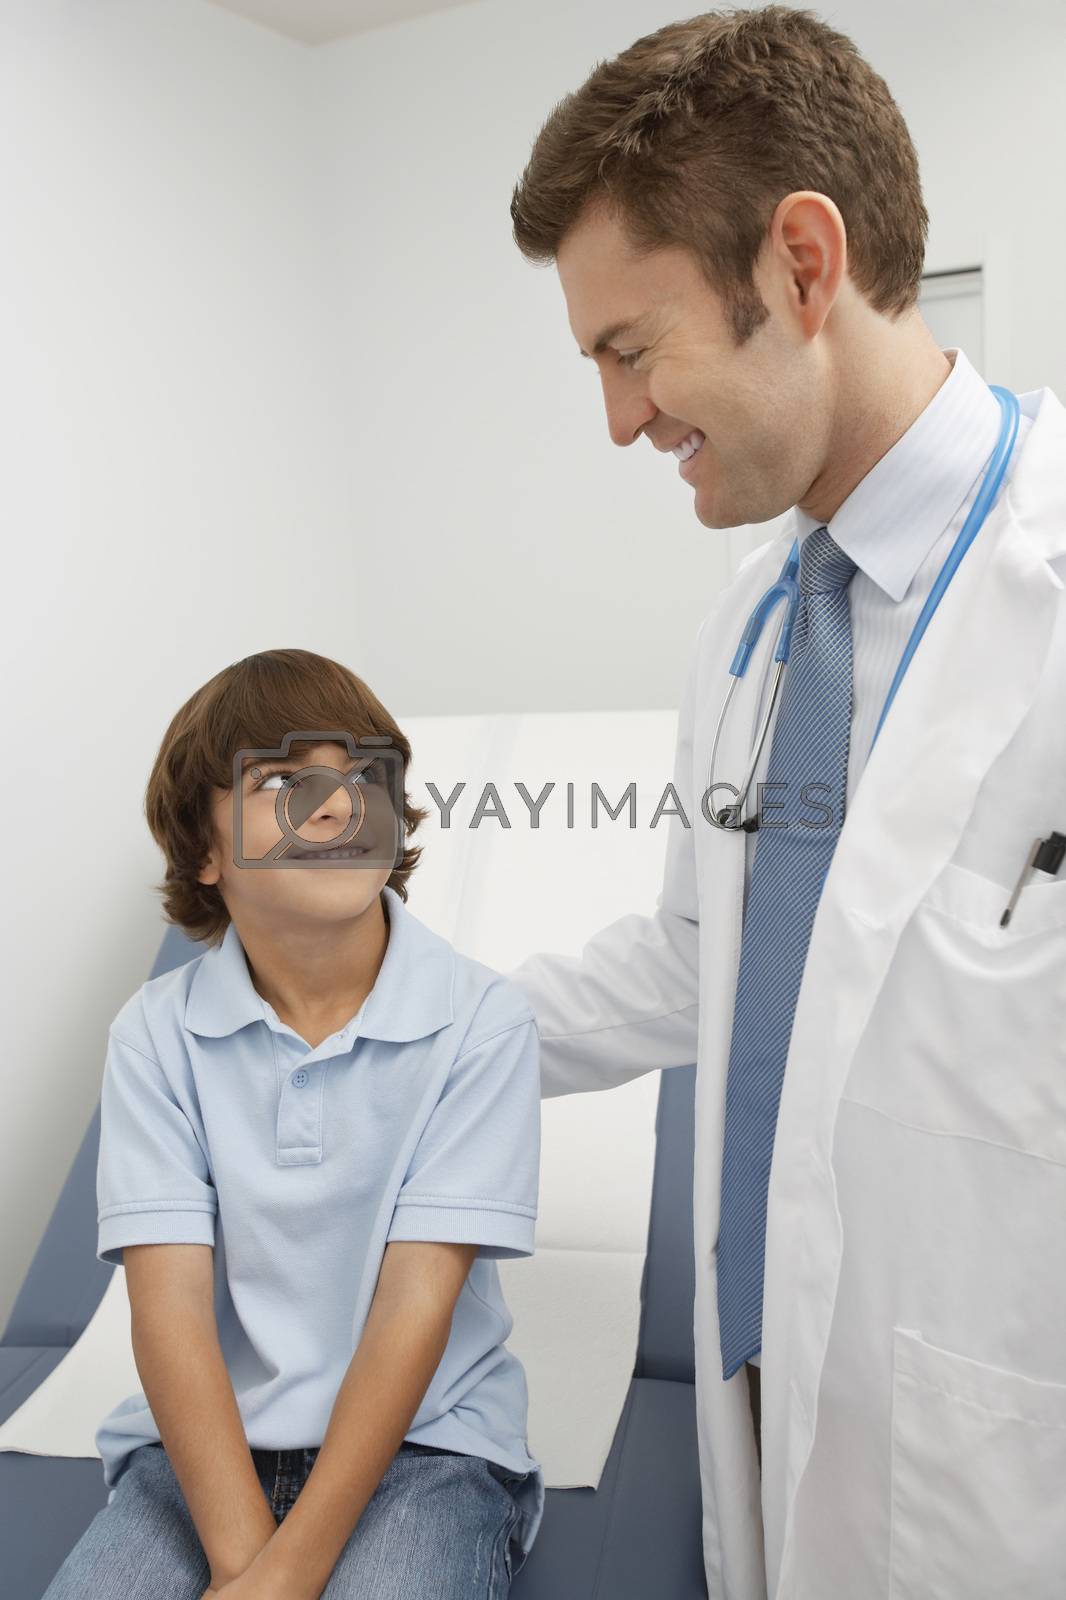 Royalty free image of Doctor and young patient by moodboard